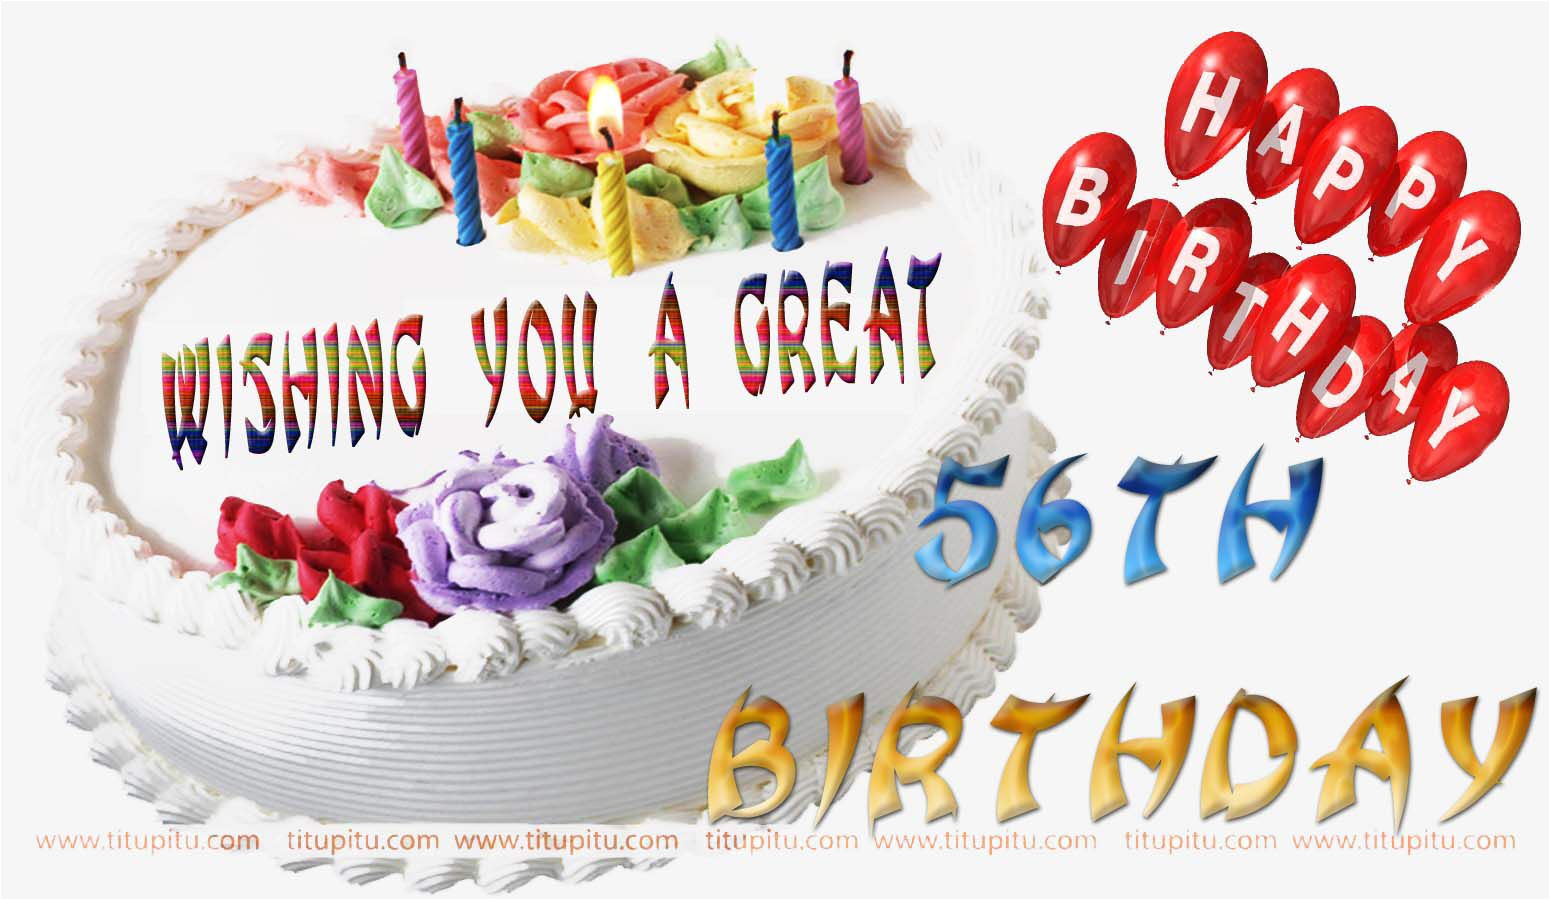 Happy Birthday Wishes Write Name On Card Wishing You A Great 56 Th Birthday 25th Birthday Wishes